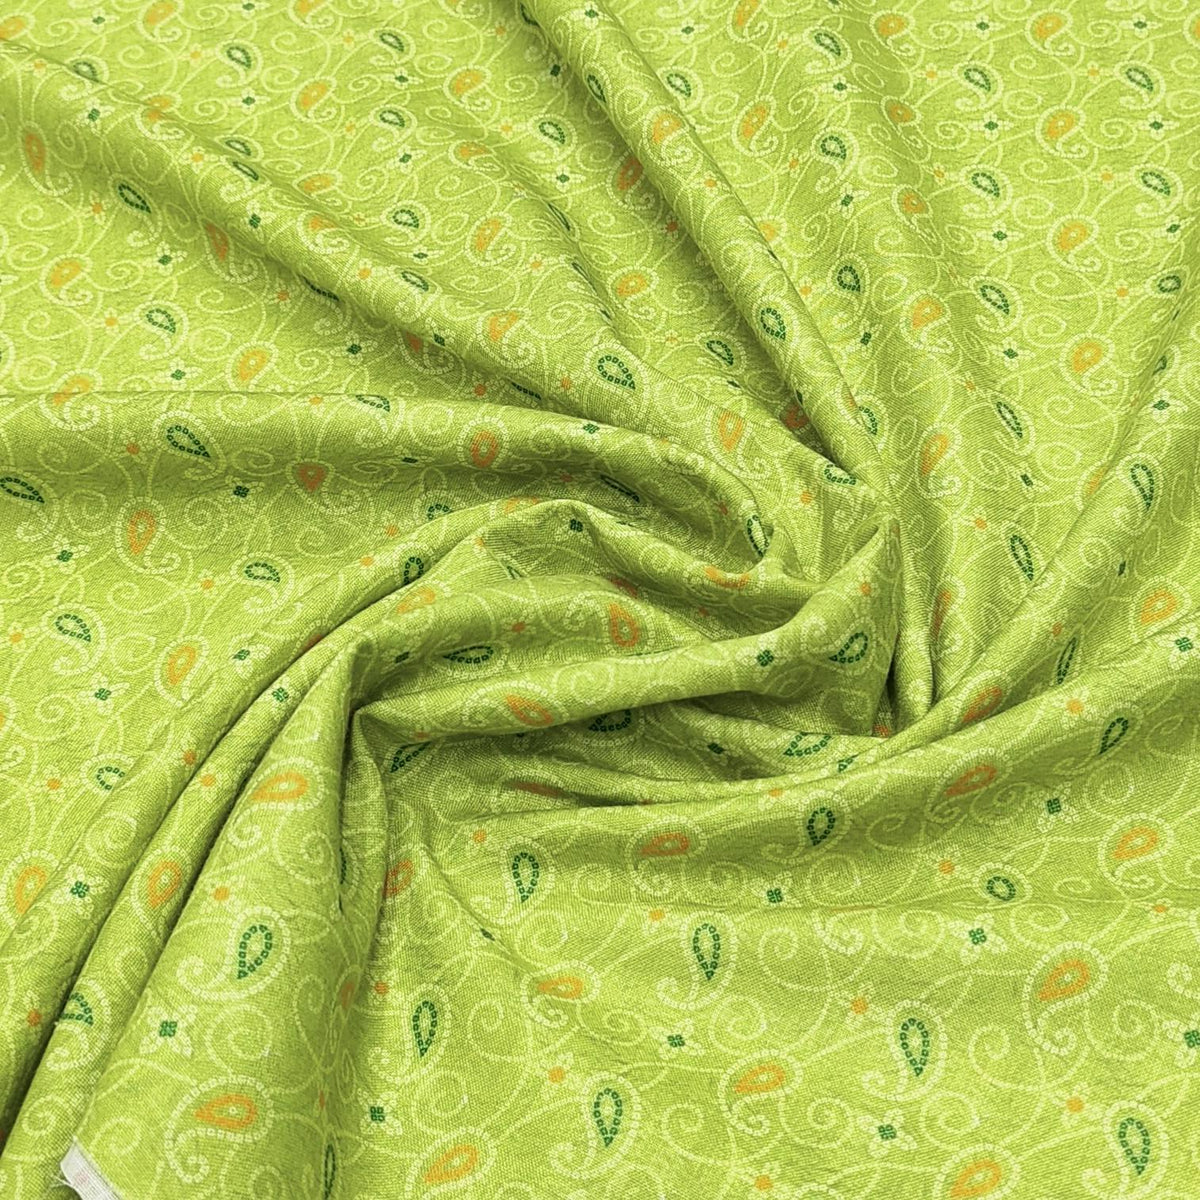 Mantire Special Wrinkle Free Digital Printed Shirt Fabric Colour mint green